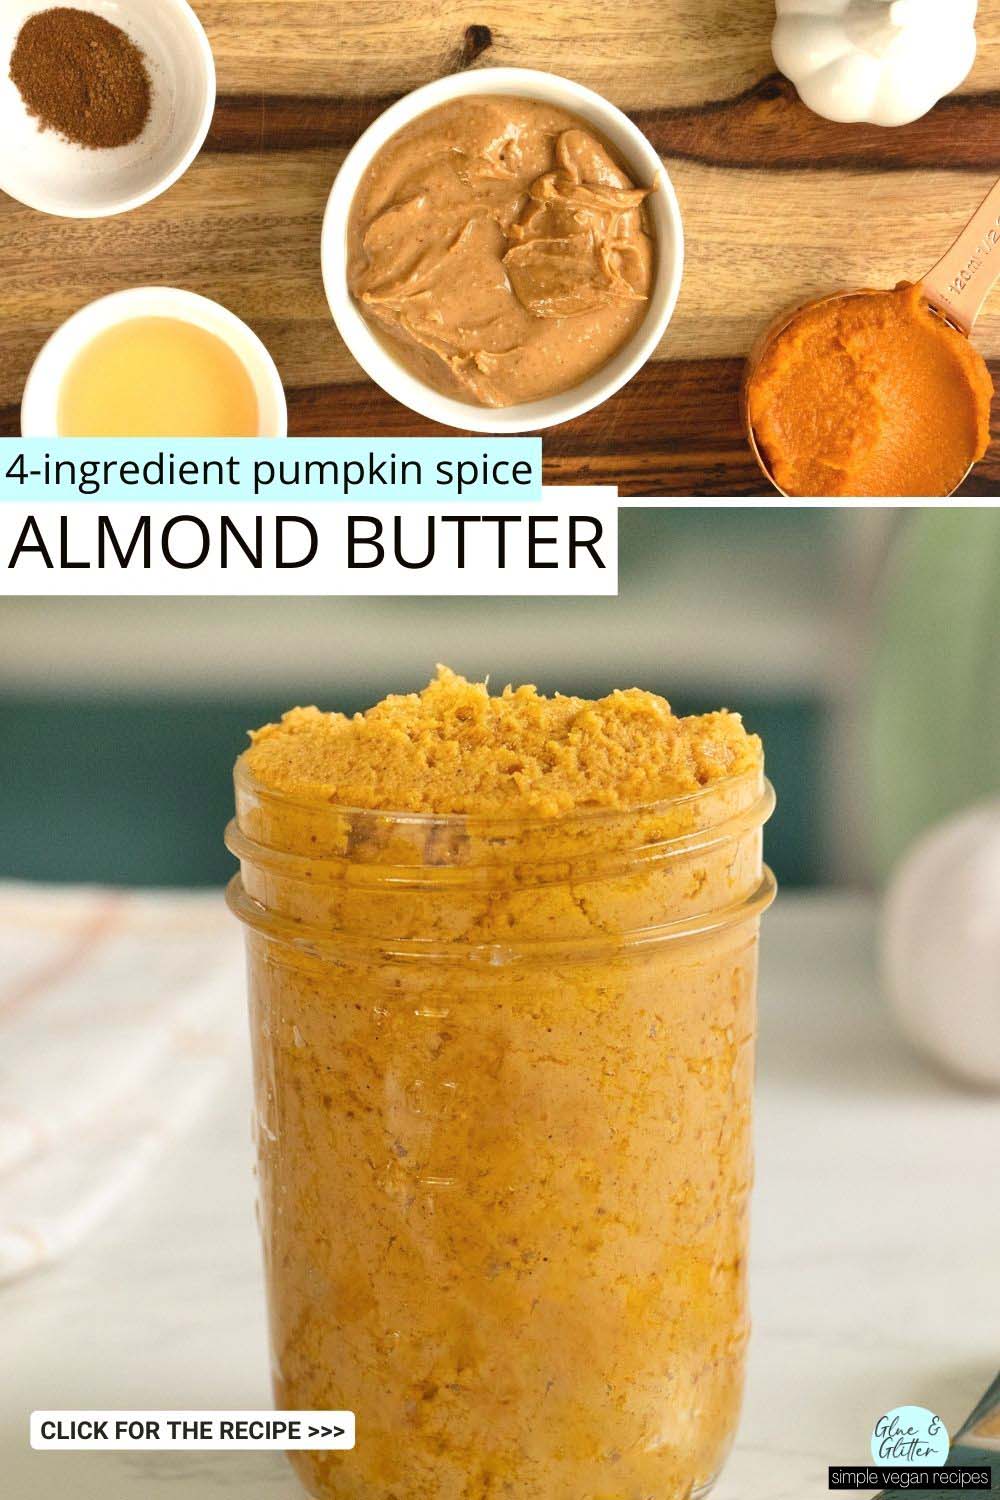 image collage showing pumpkin spice almond butter ingredients and the finished pumpkin almond butter in a jar